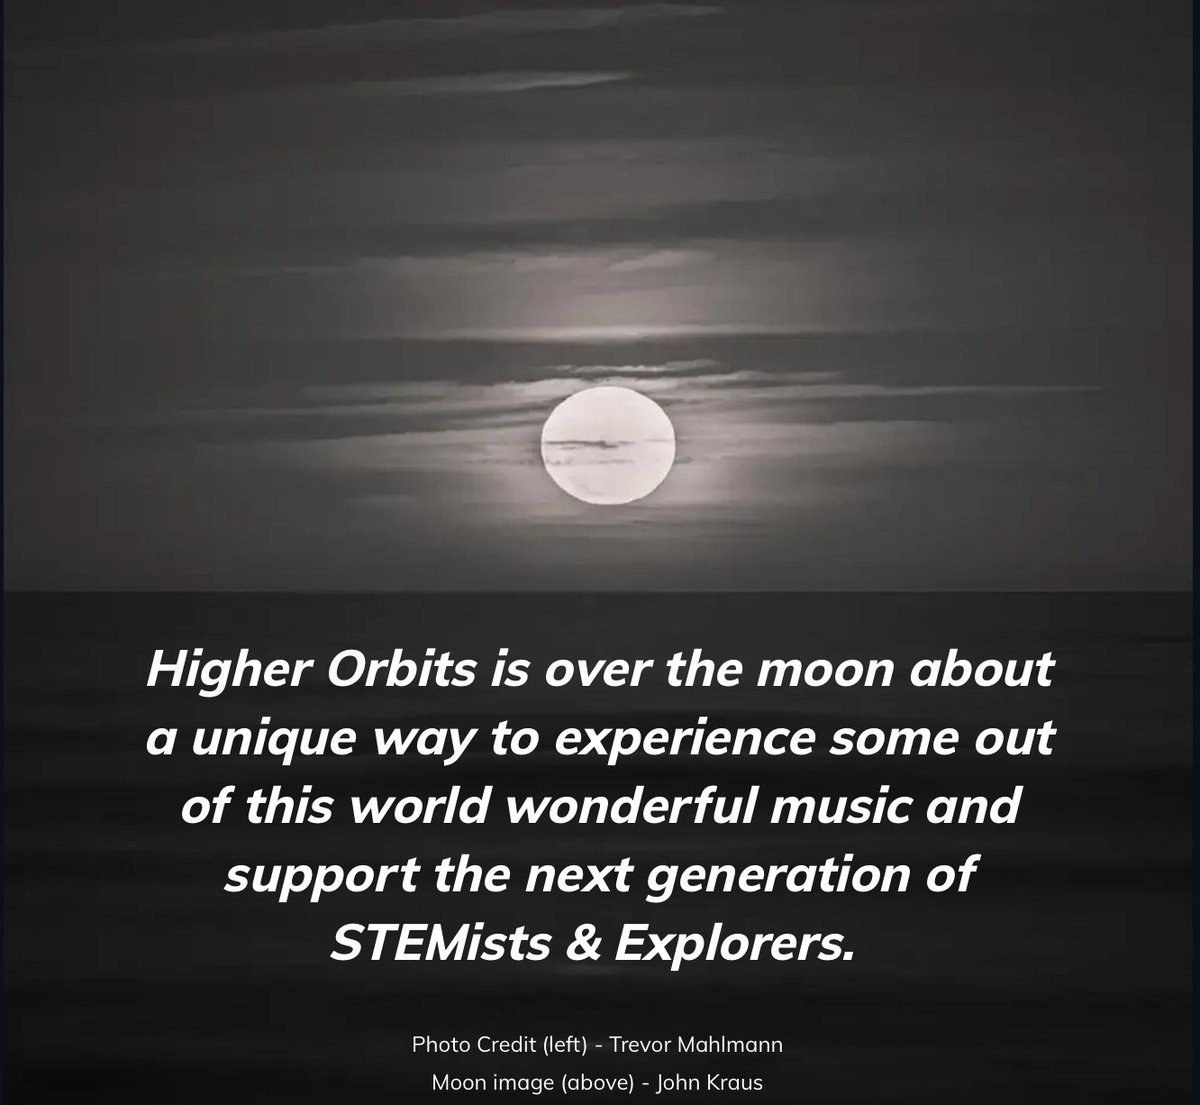 Space Song for #STEM! This #MusicMonday be sure to check out this stellar tune from @SpaceXTrip that supports Higher Orbits!

higherorbits.org/space-song-for…

And talk about gorgeous photography from @johnkrausphotos!

#SpaceInspires #MoonMonday #STEAM #Moon @clubforfuture